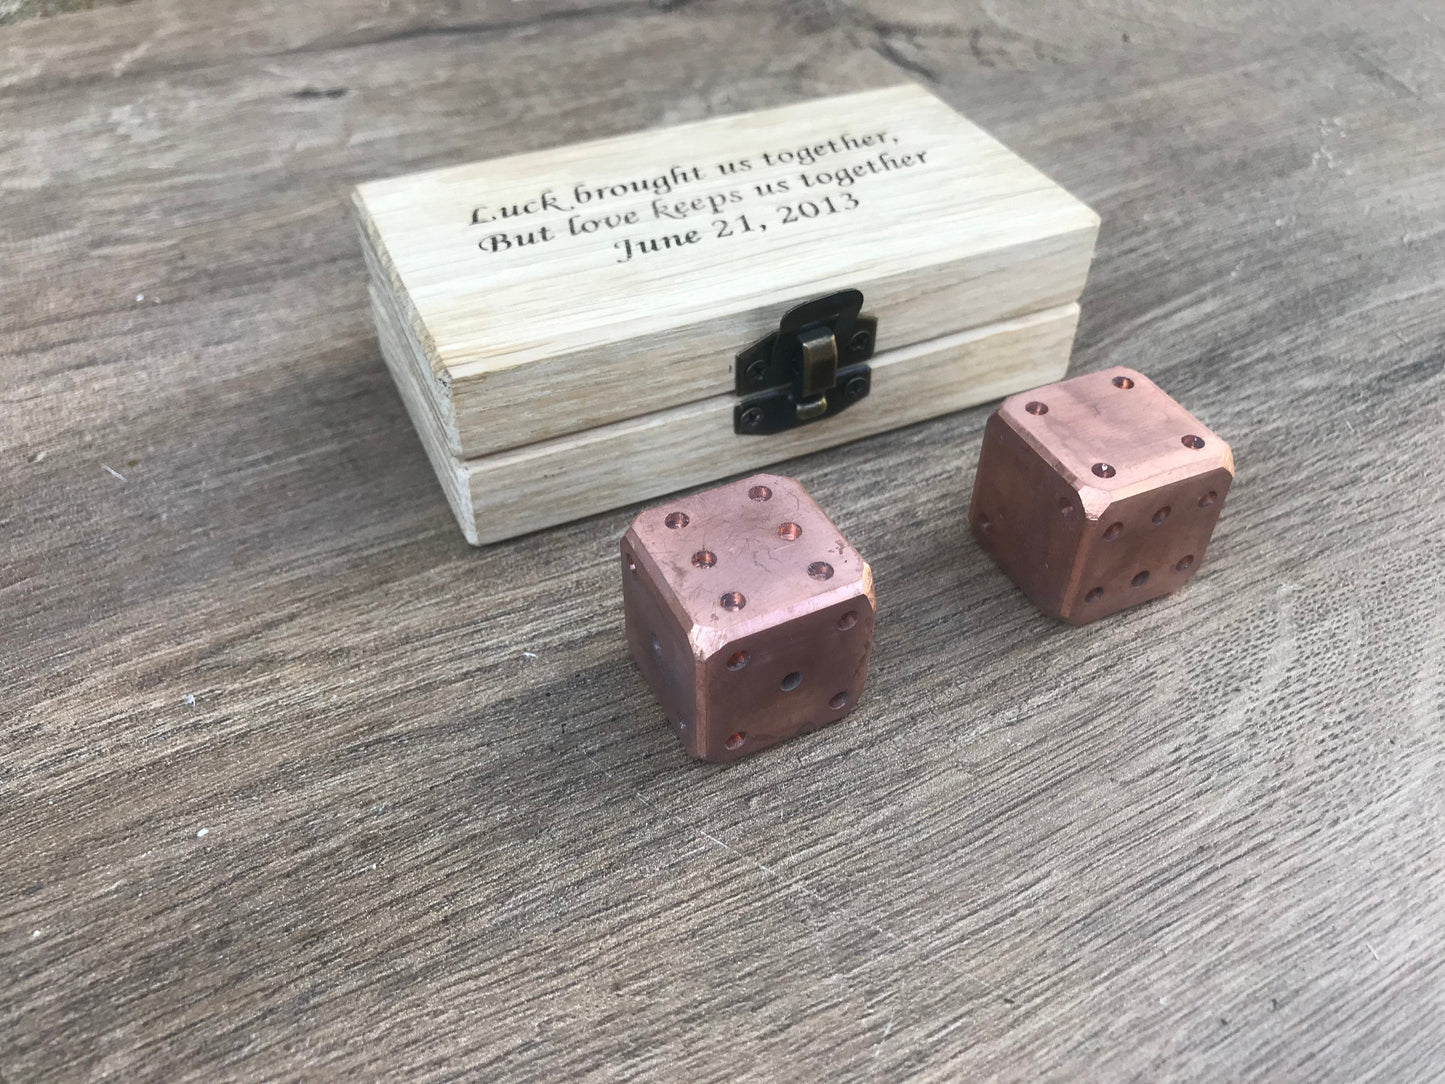 Copper anniversary, copper gift, copper dices, dice box, gift box, engraved gift, personalized gift, dice games, tabletop game, board game